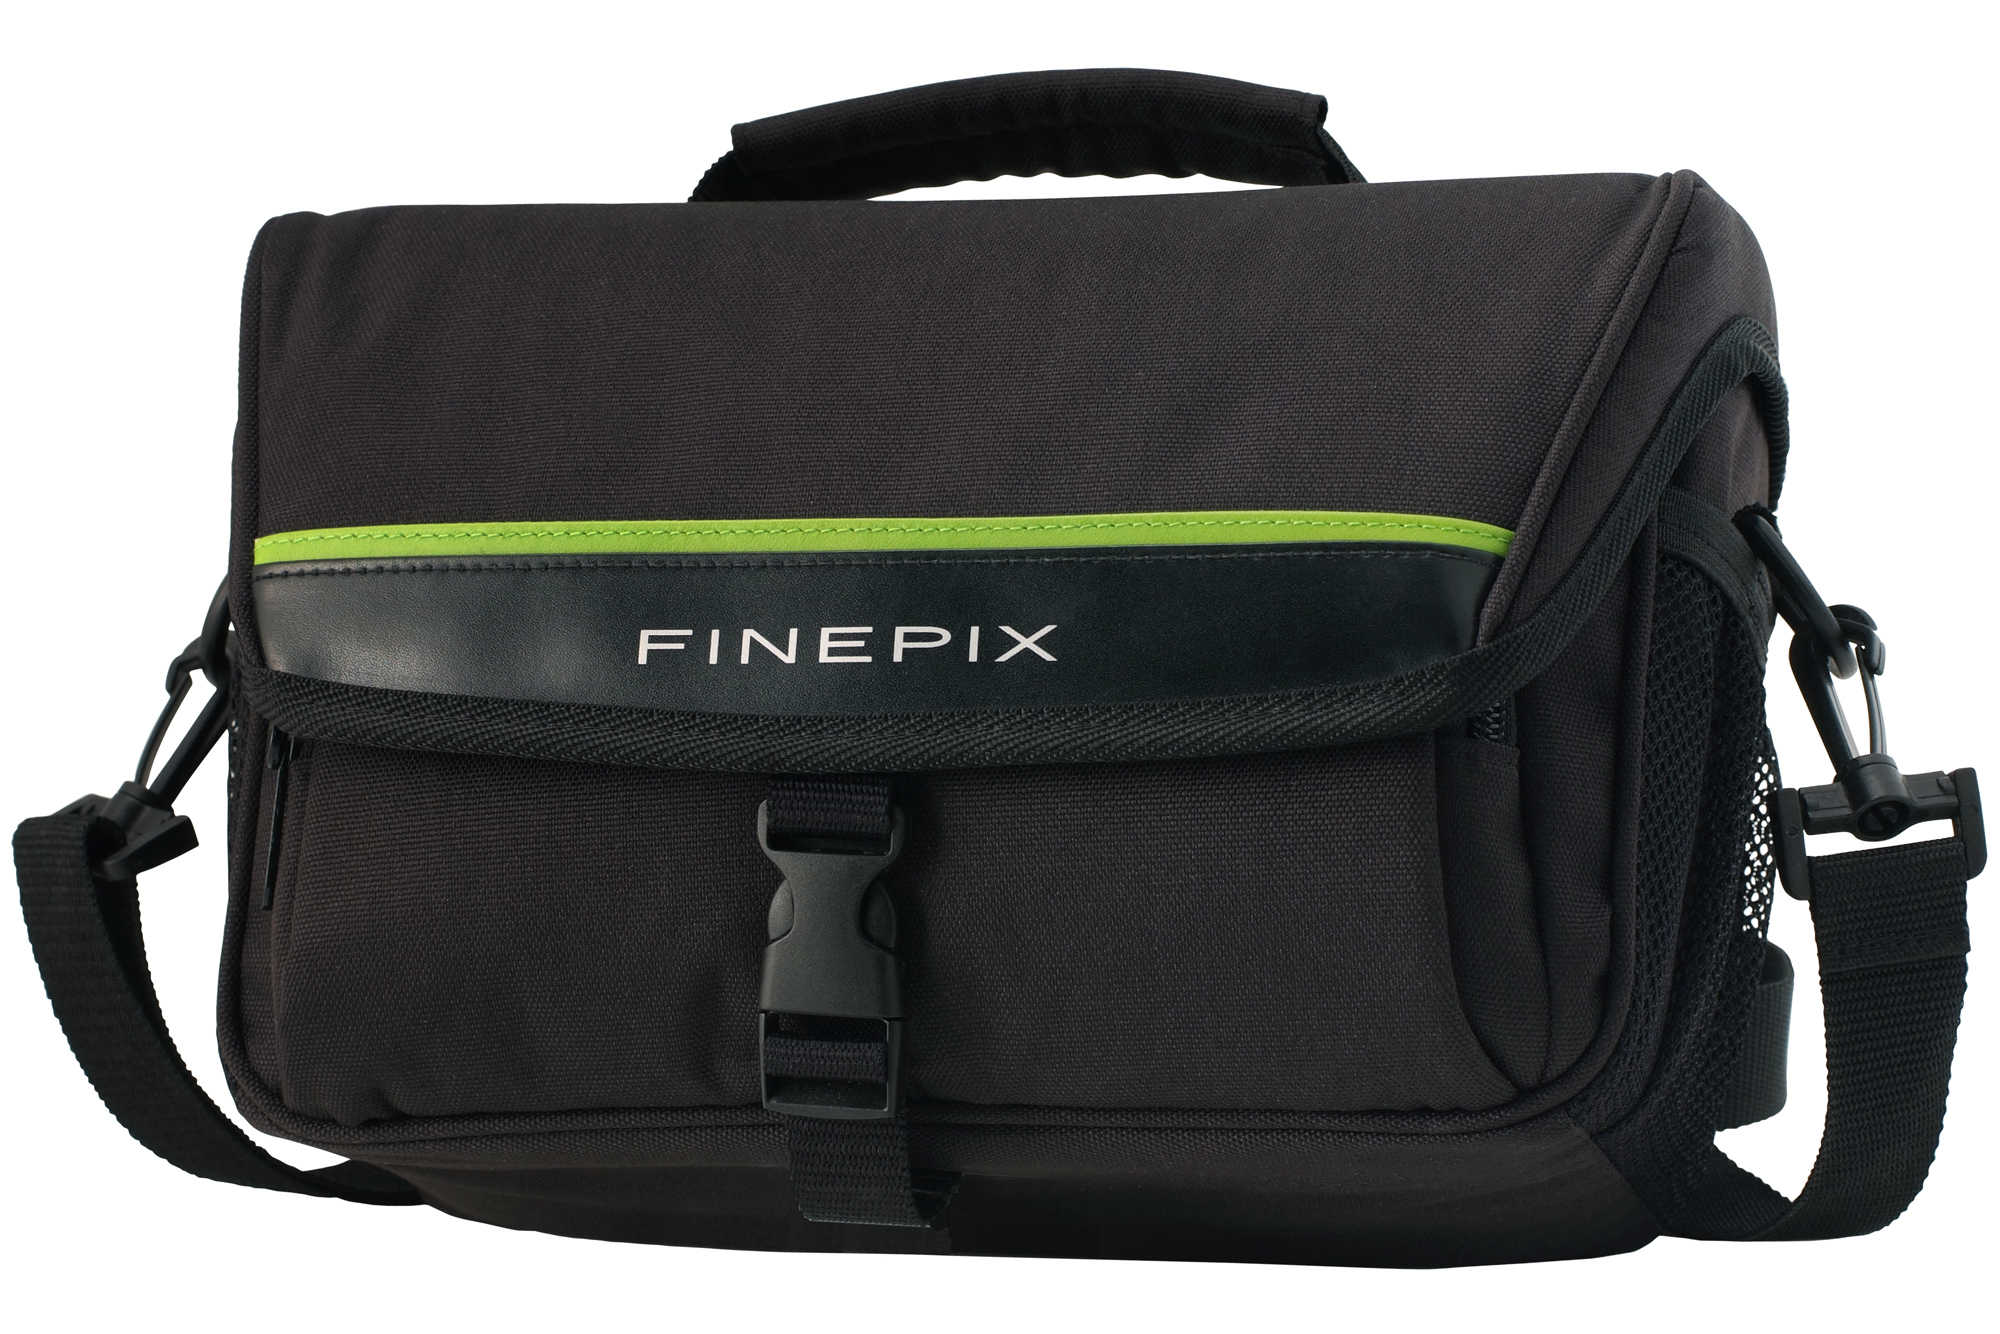 Photos - Other for Computer Fujifilm FinePix Universal System Bag Case for Compact CSC Mirrorless Small DSL 400 